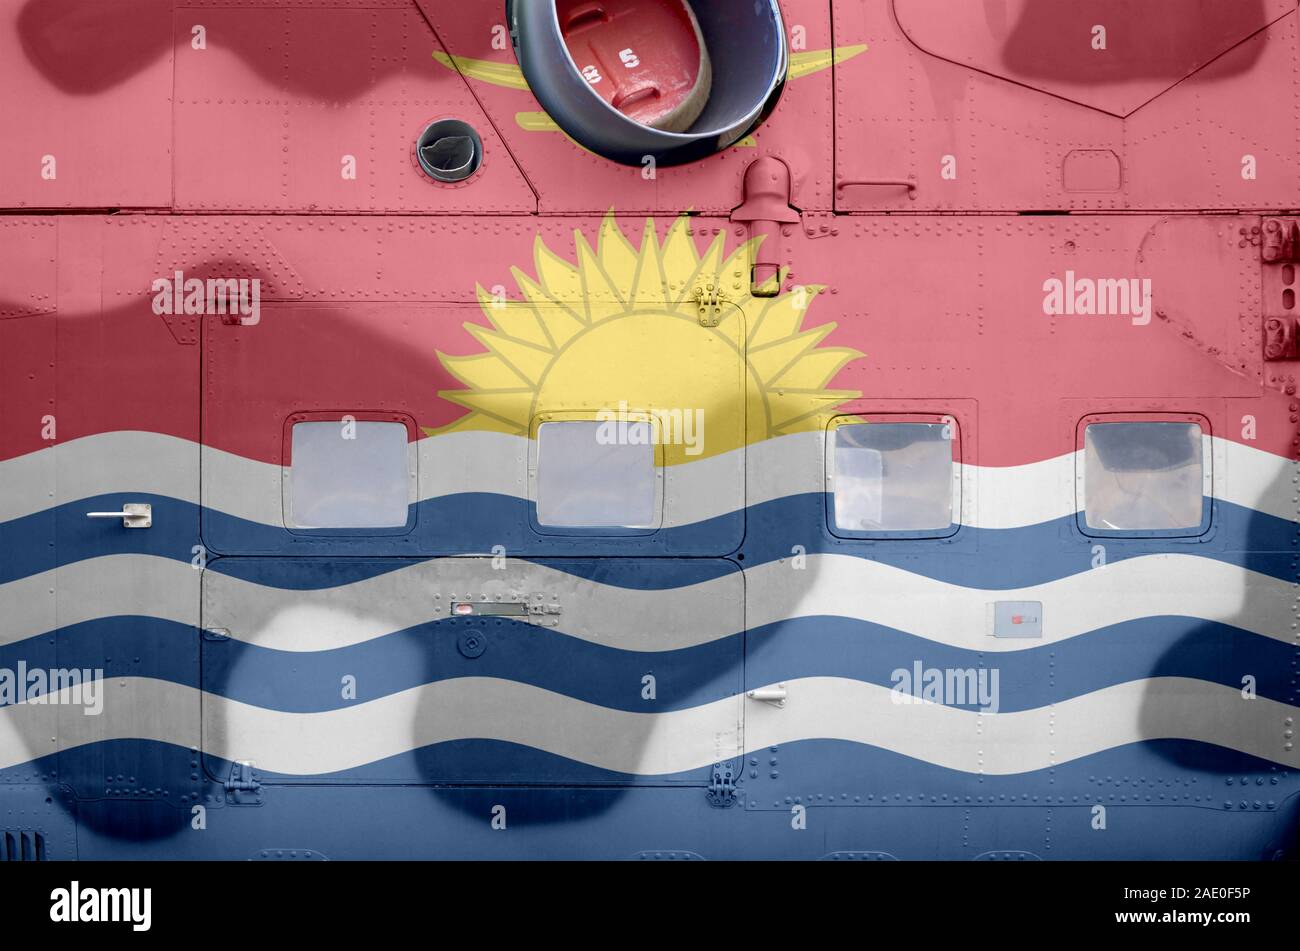 Kiribati flag depicted on side part of military armored helicopter close up. Army forces aircraft conceptual background Stock Photo